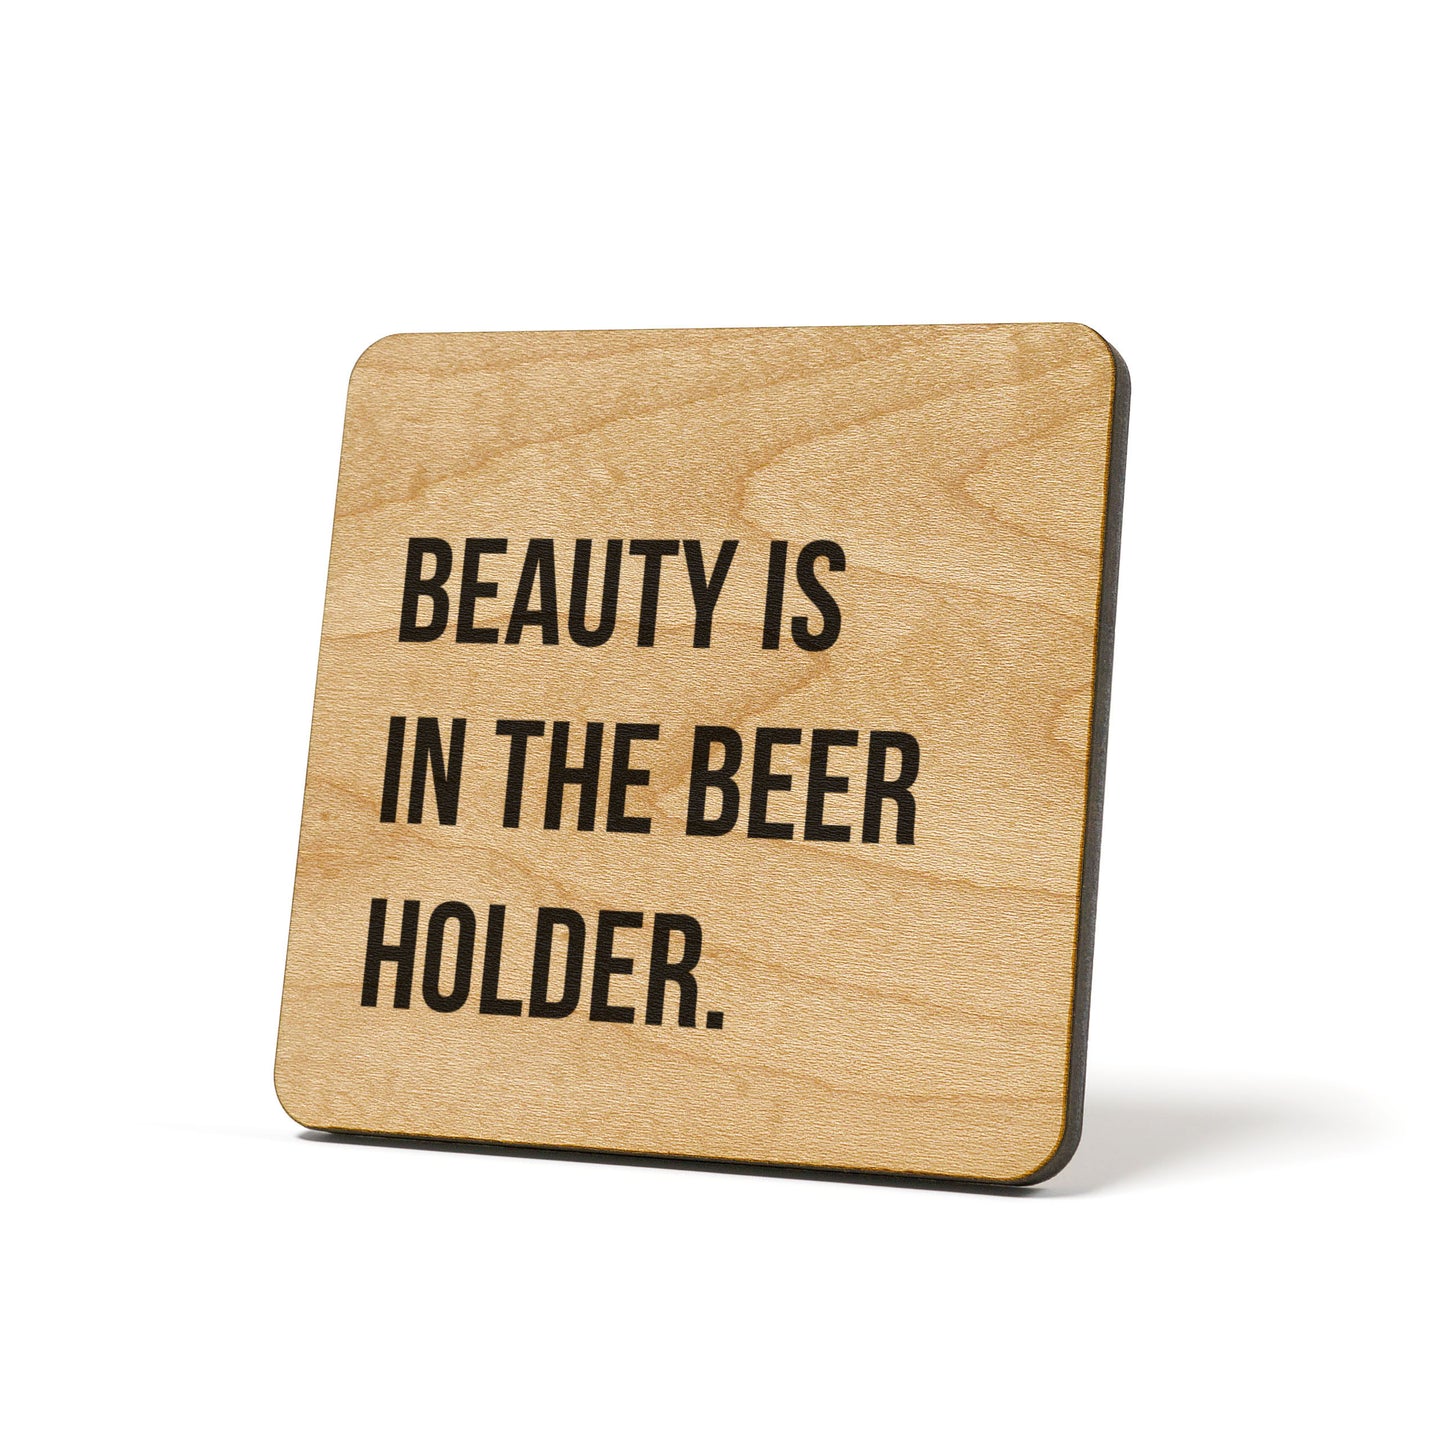 Beauty is in the beer holder Quote Coaster